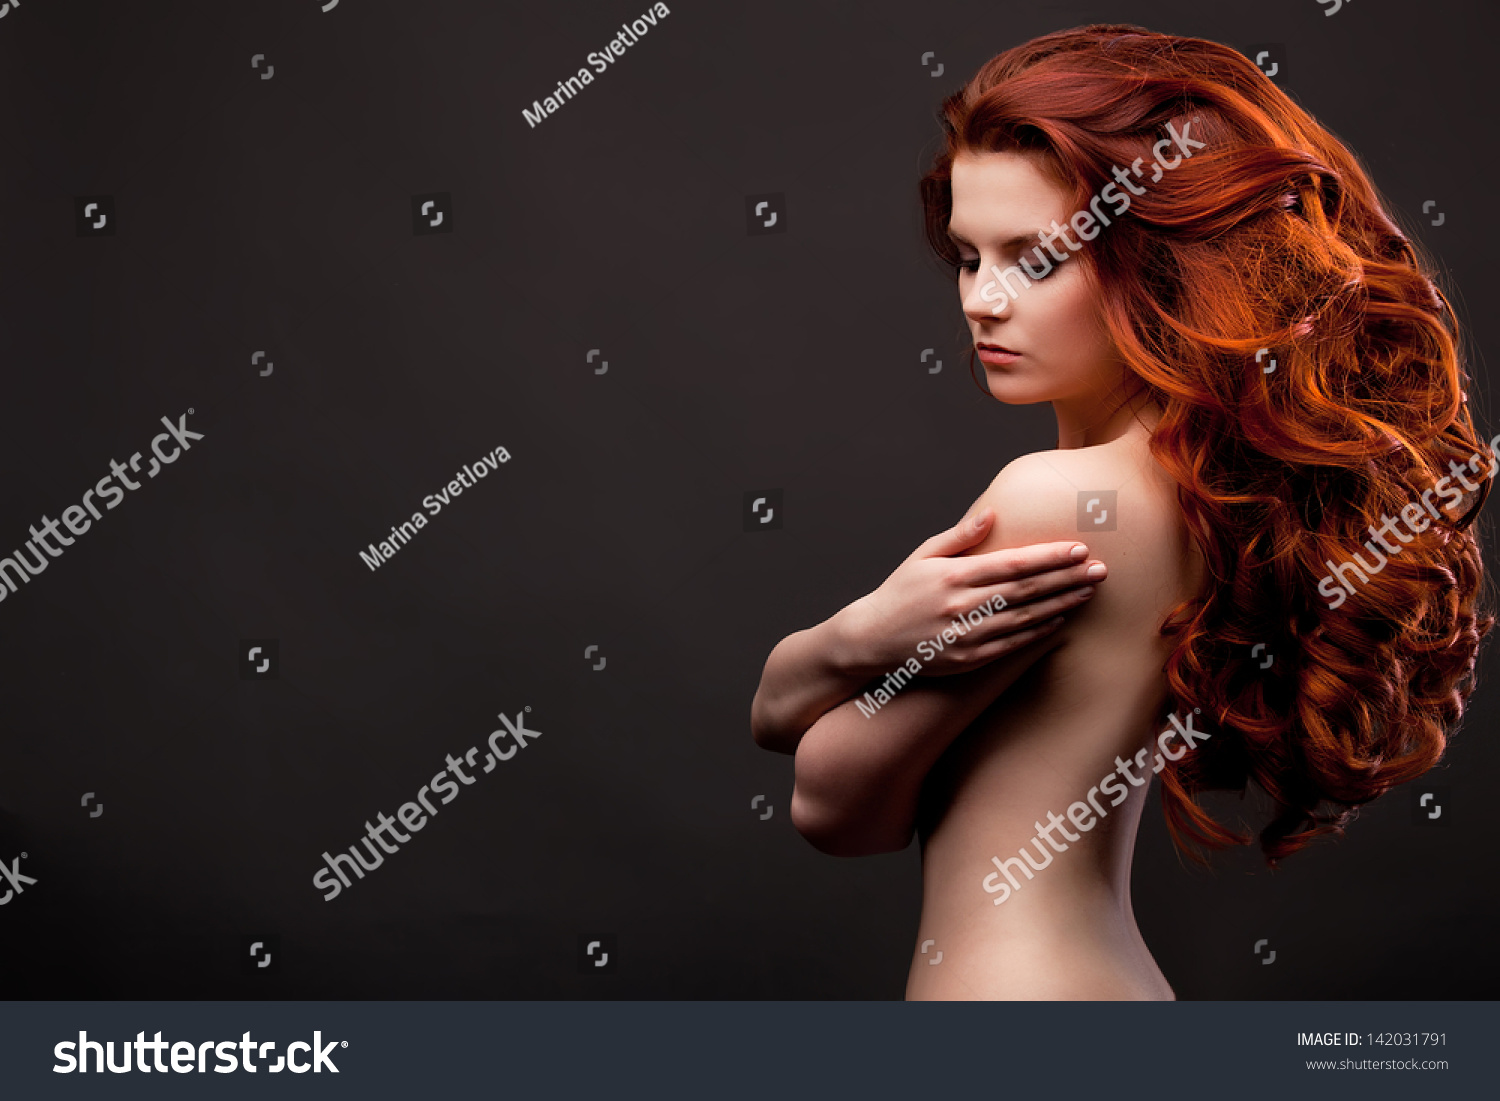 Picture Of Nude Women 8